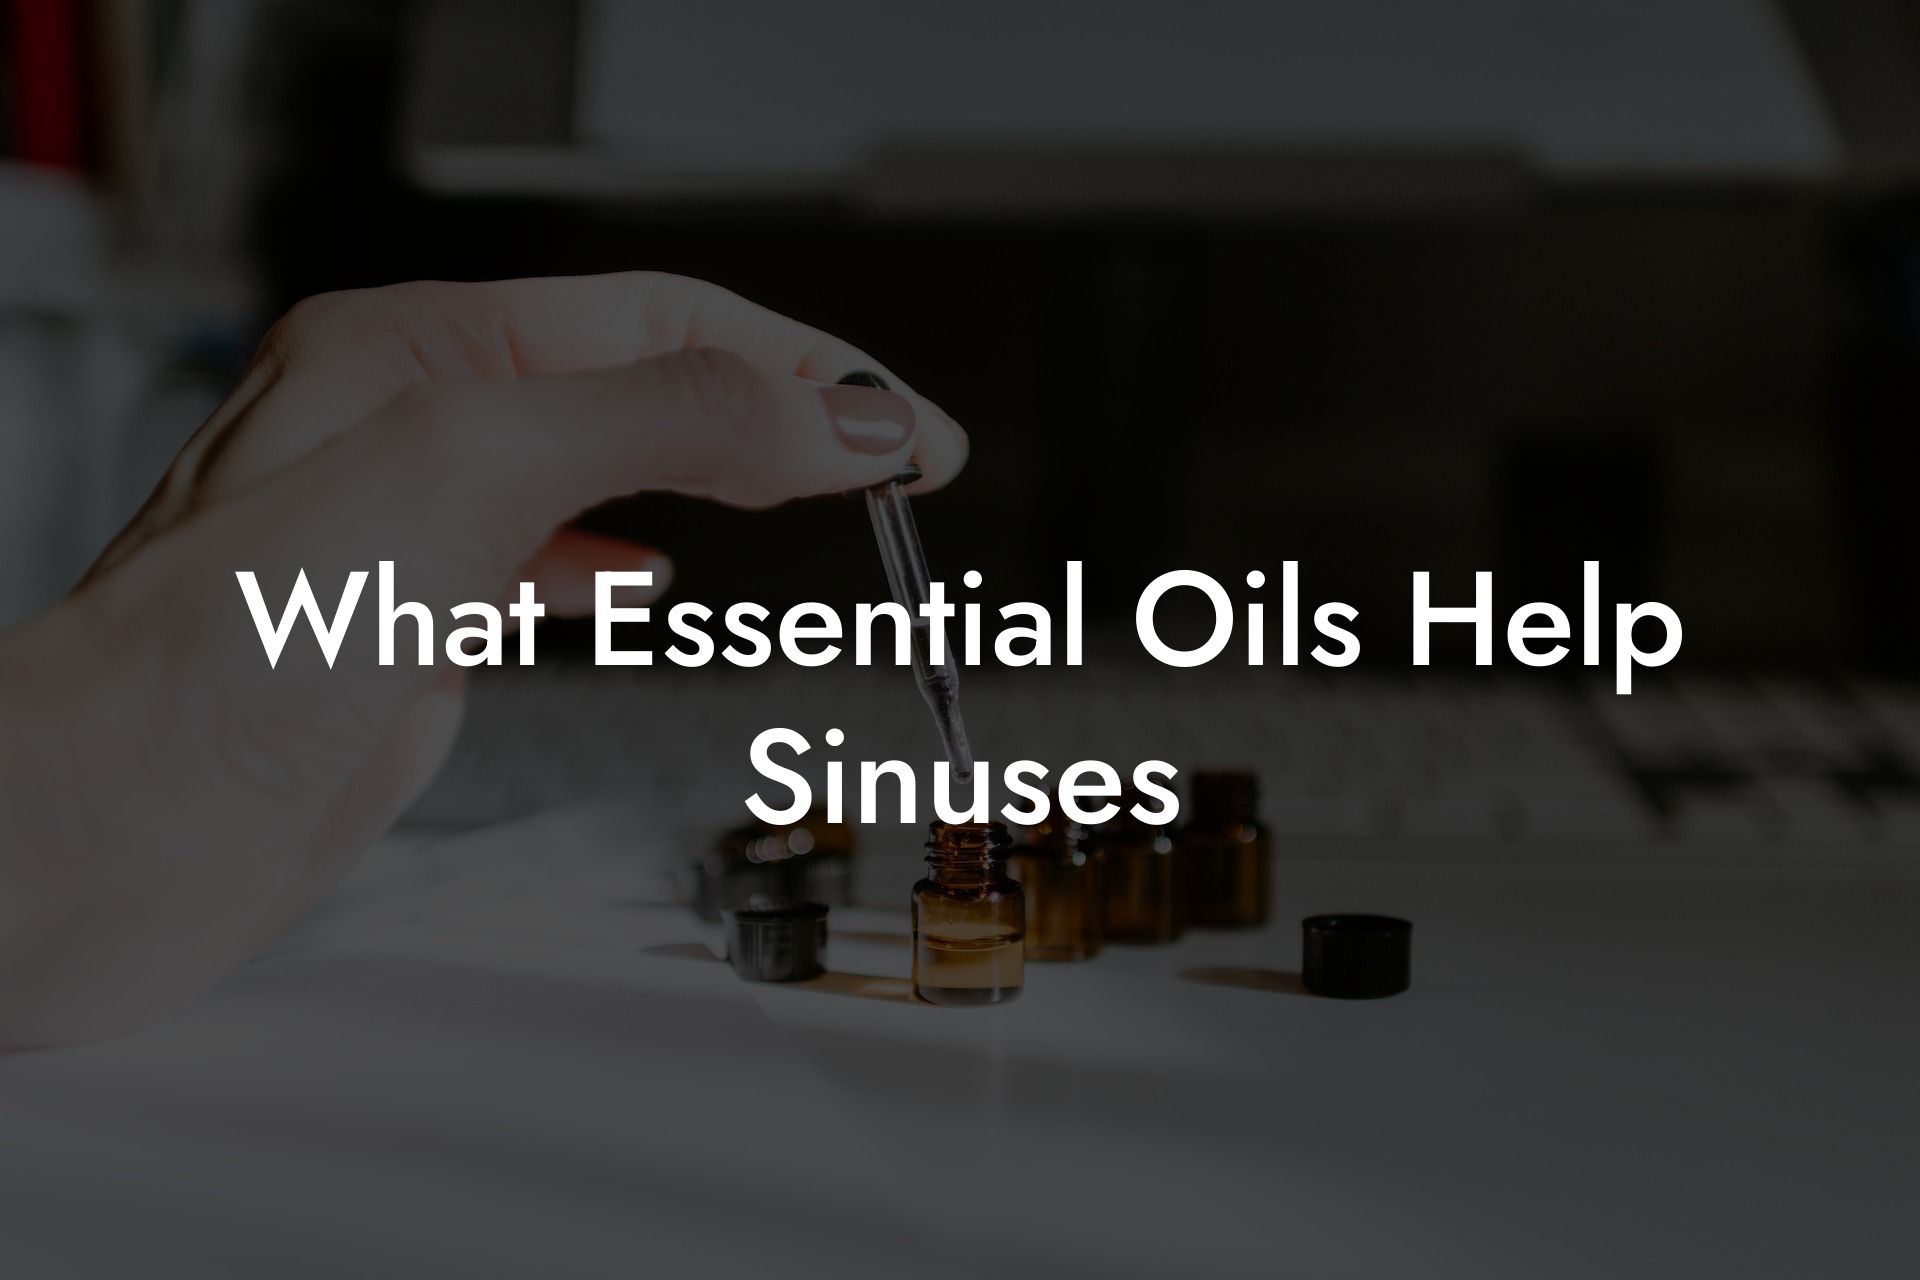 What Essential Oils Help Sinuses